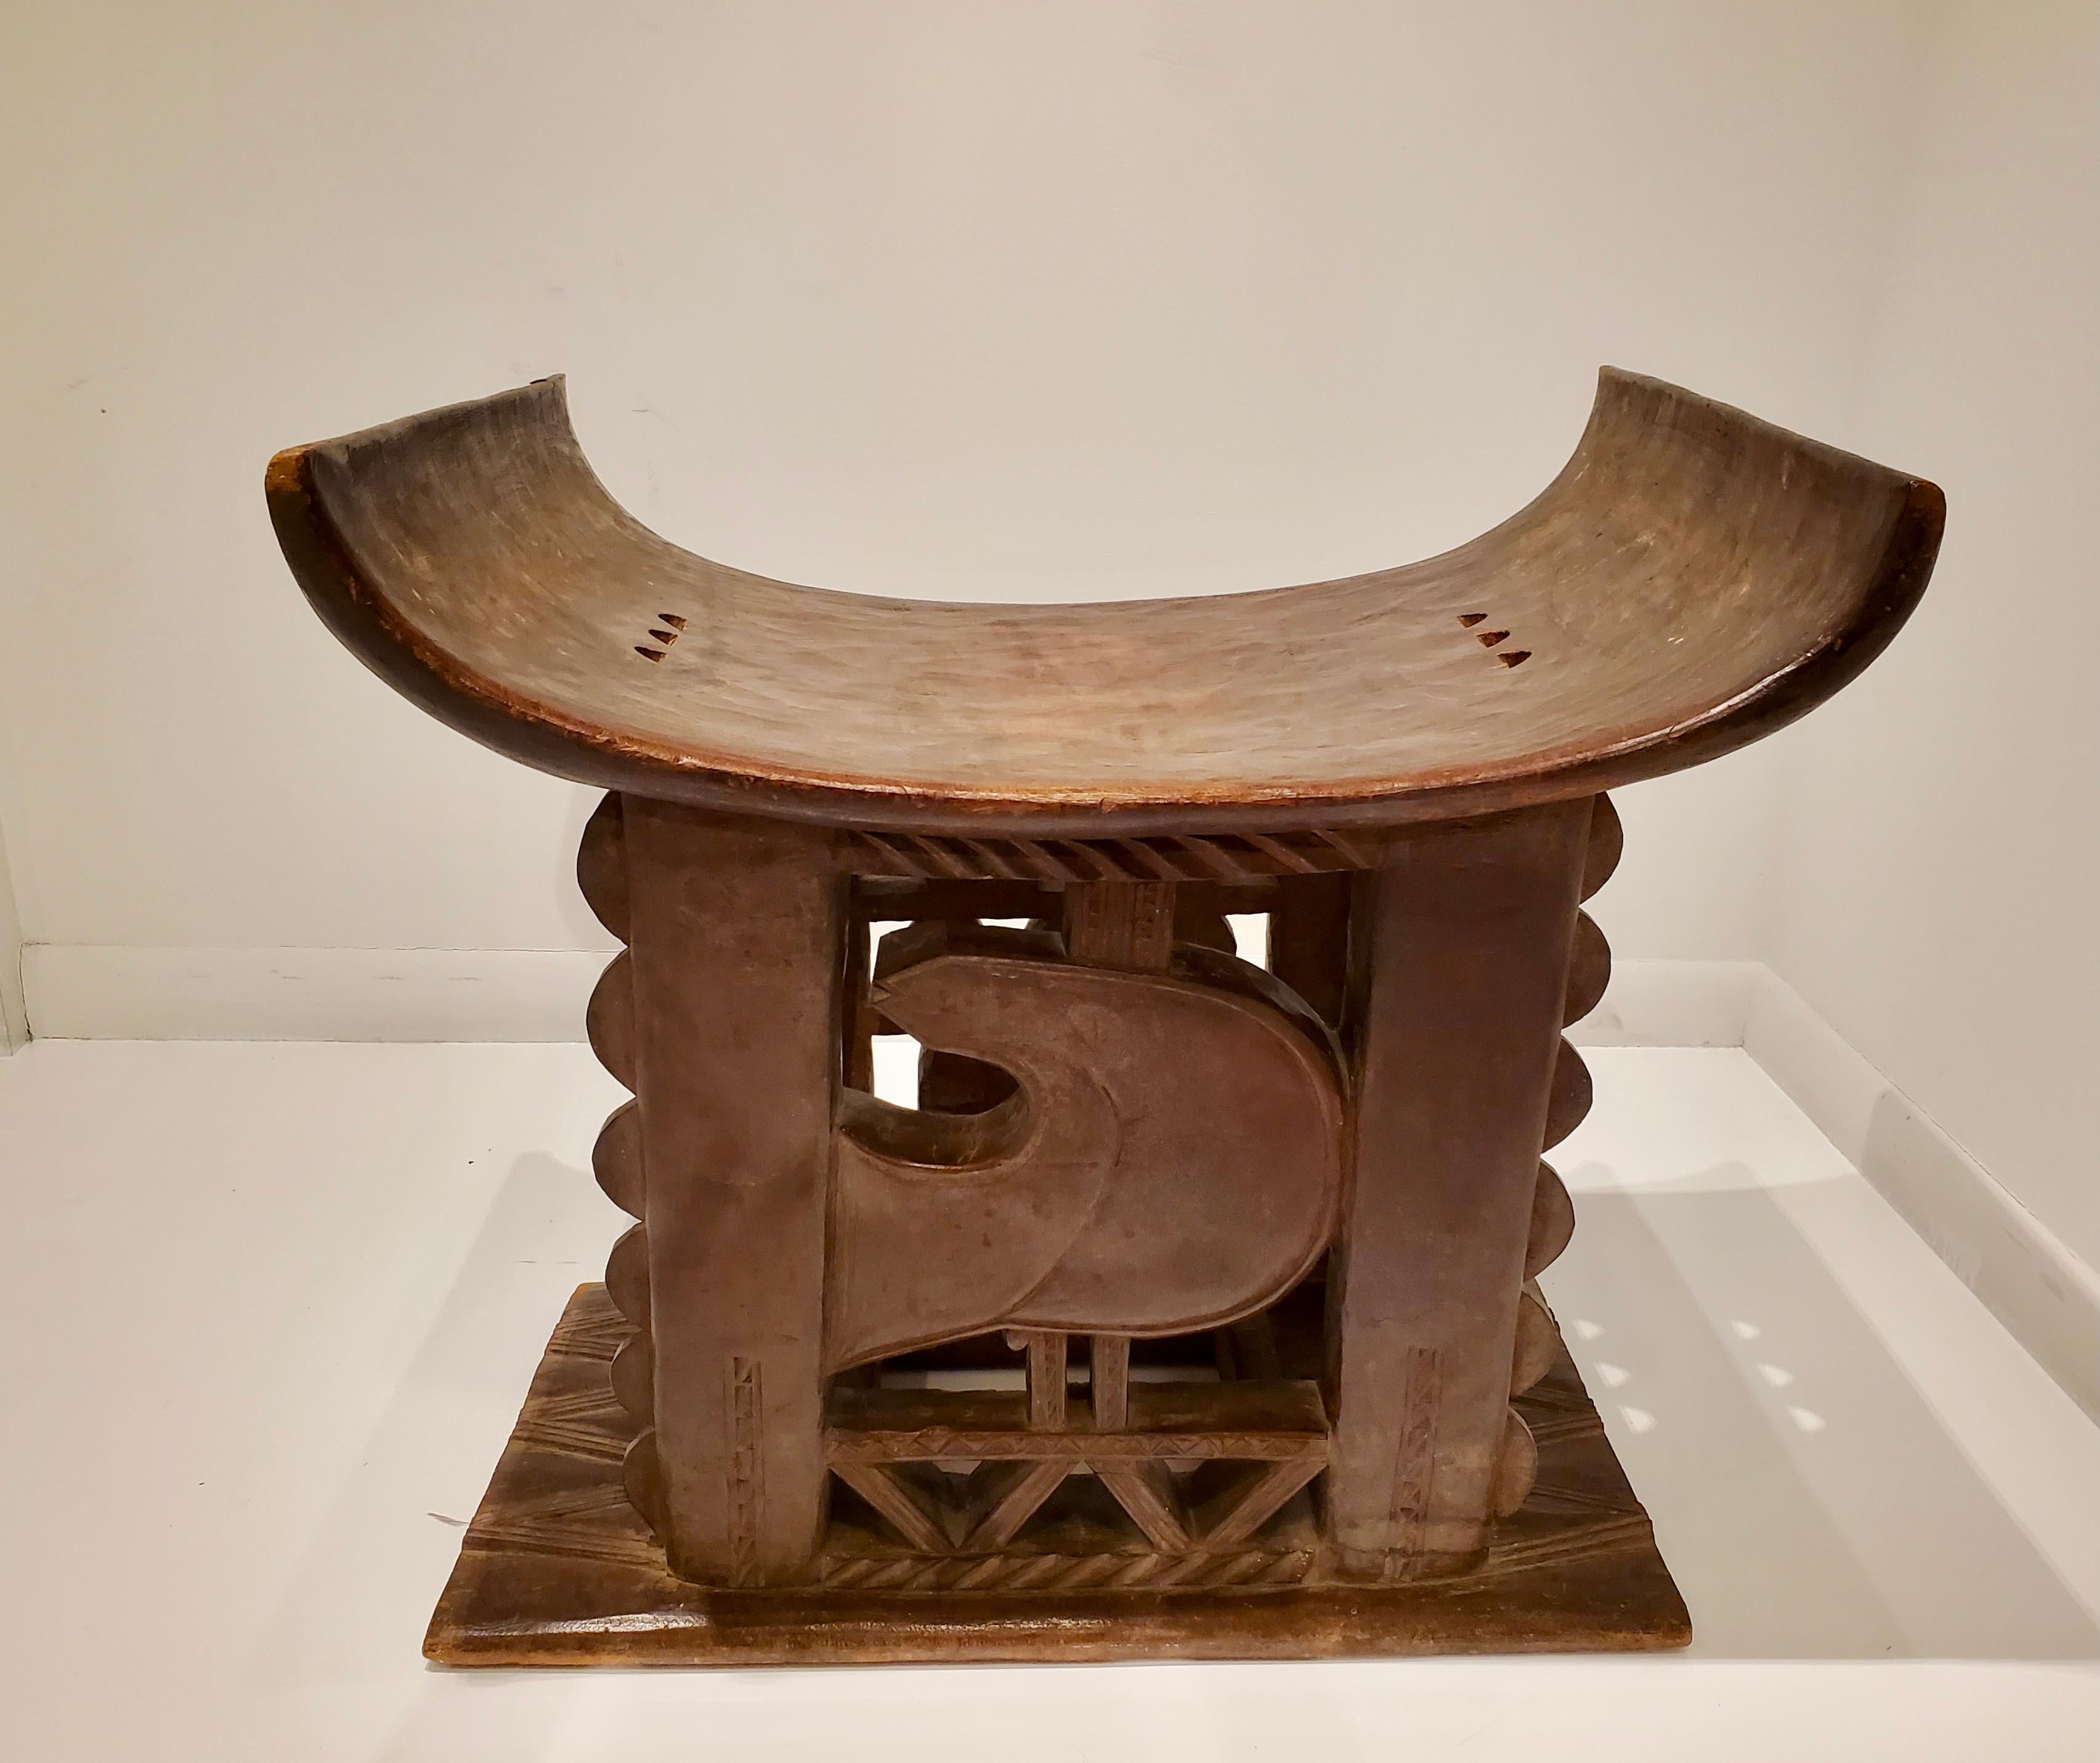 An exceptional and unusually large early 20th century African Ashanti hand-carved wood stool from Ghana featuring scalloped and geometric forms on one side with a stylized bird on the other which is the symbol of the word 